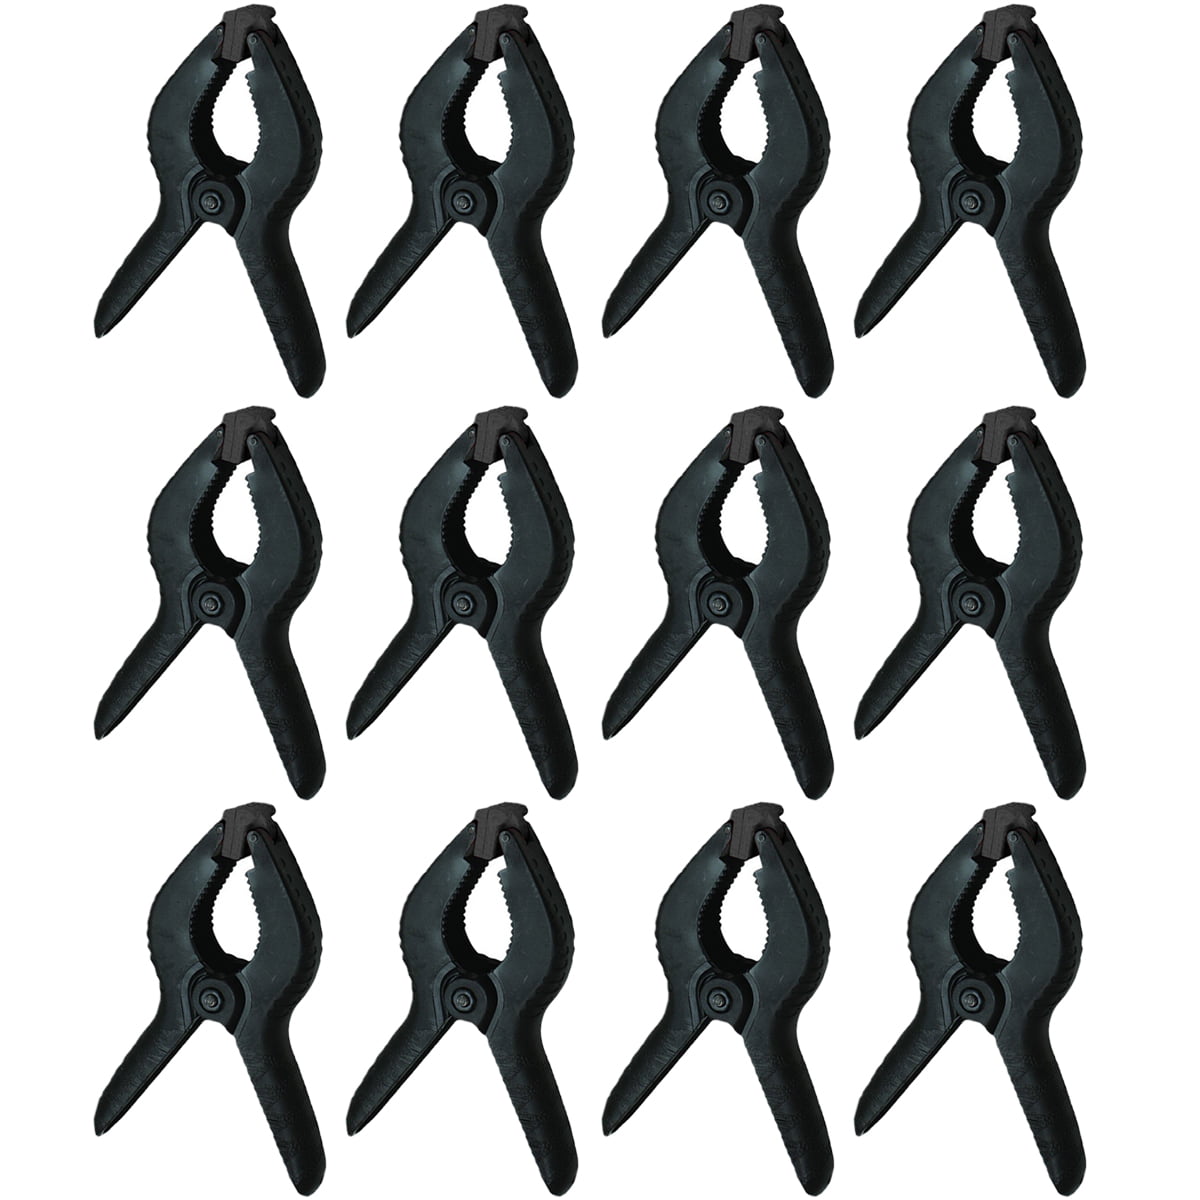 6 Inch Spring Clamps Large Heavy Duty Plastic Muslin Clamps Online Best Service 12 Pack 